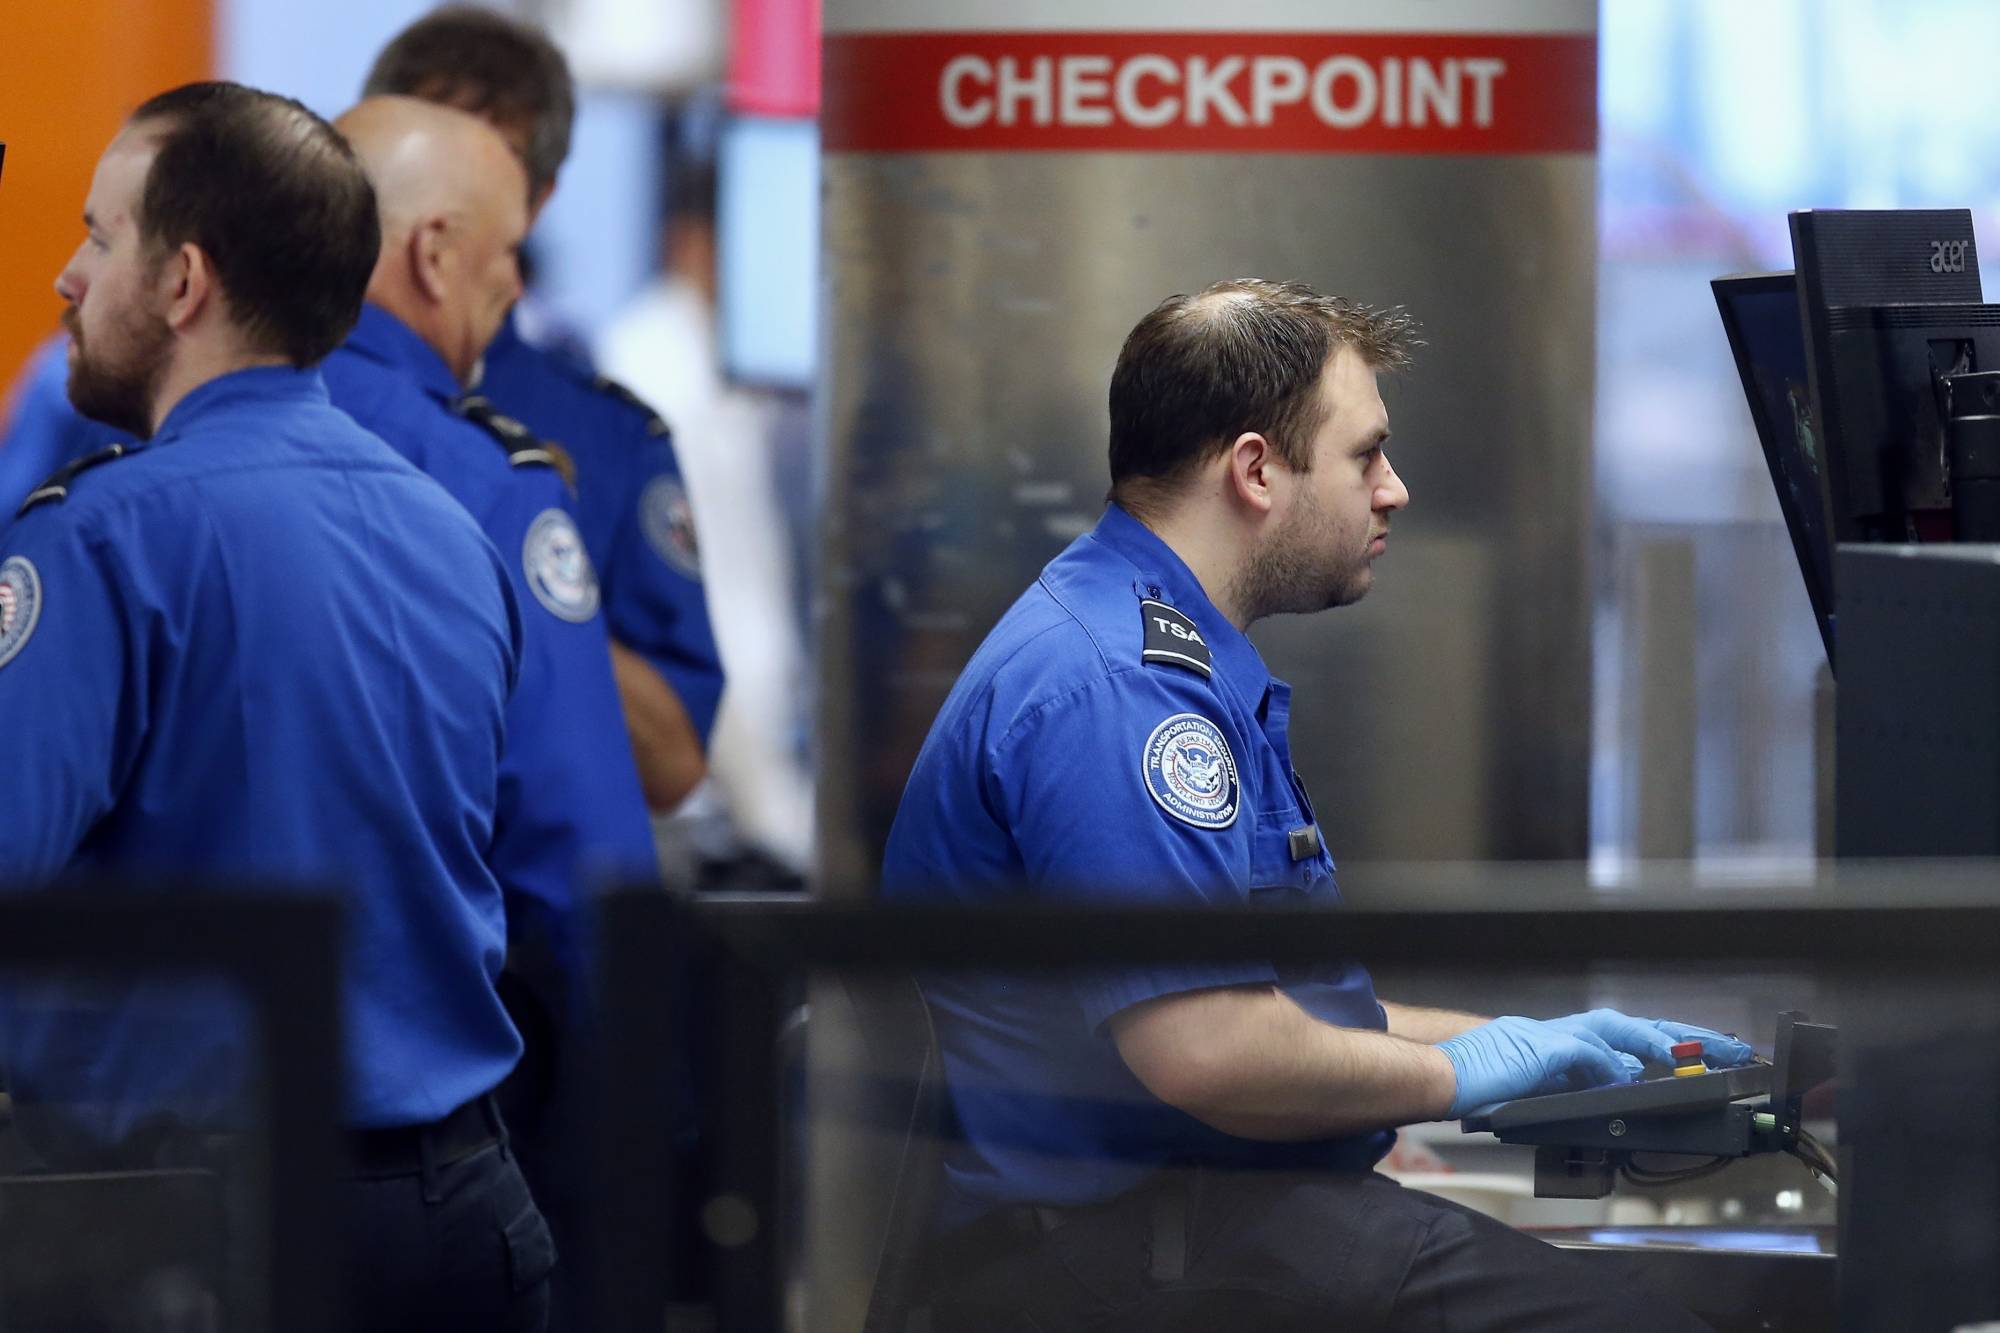 Transportation Security Administration officers work at a checkpoint at Logan International Airport in Boston, Saturday, Jan. 5, 2019. The TSA acknowledged an increase in the number of its employees calling off work during the partial government shutdown. (AP Photo/Michael Dwyer)